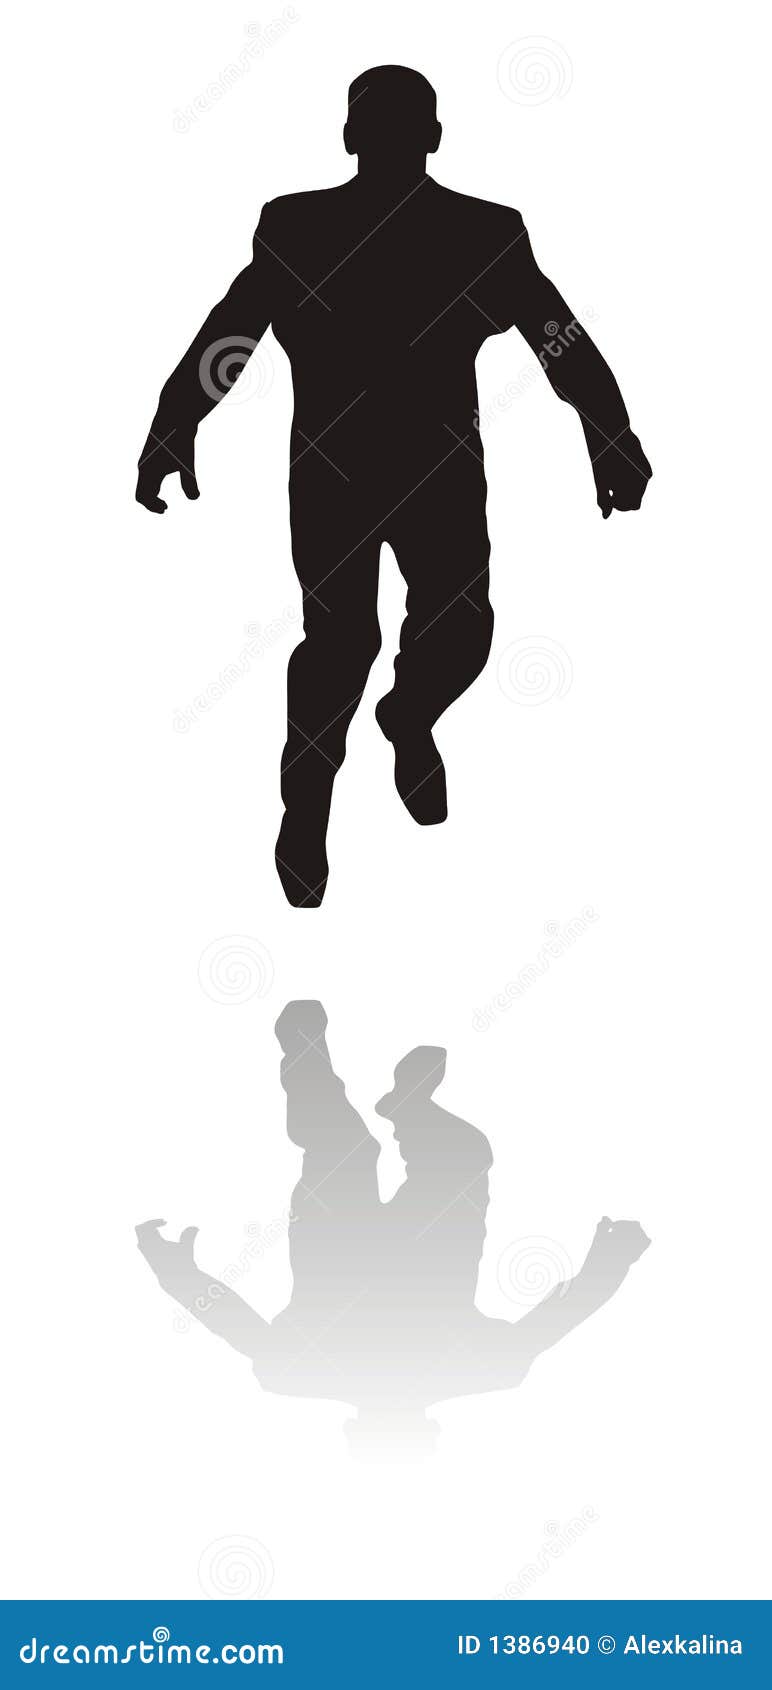 The jumping man stock vector. Illustration of loose, business - 1386940